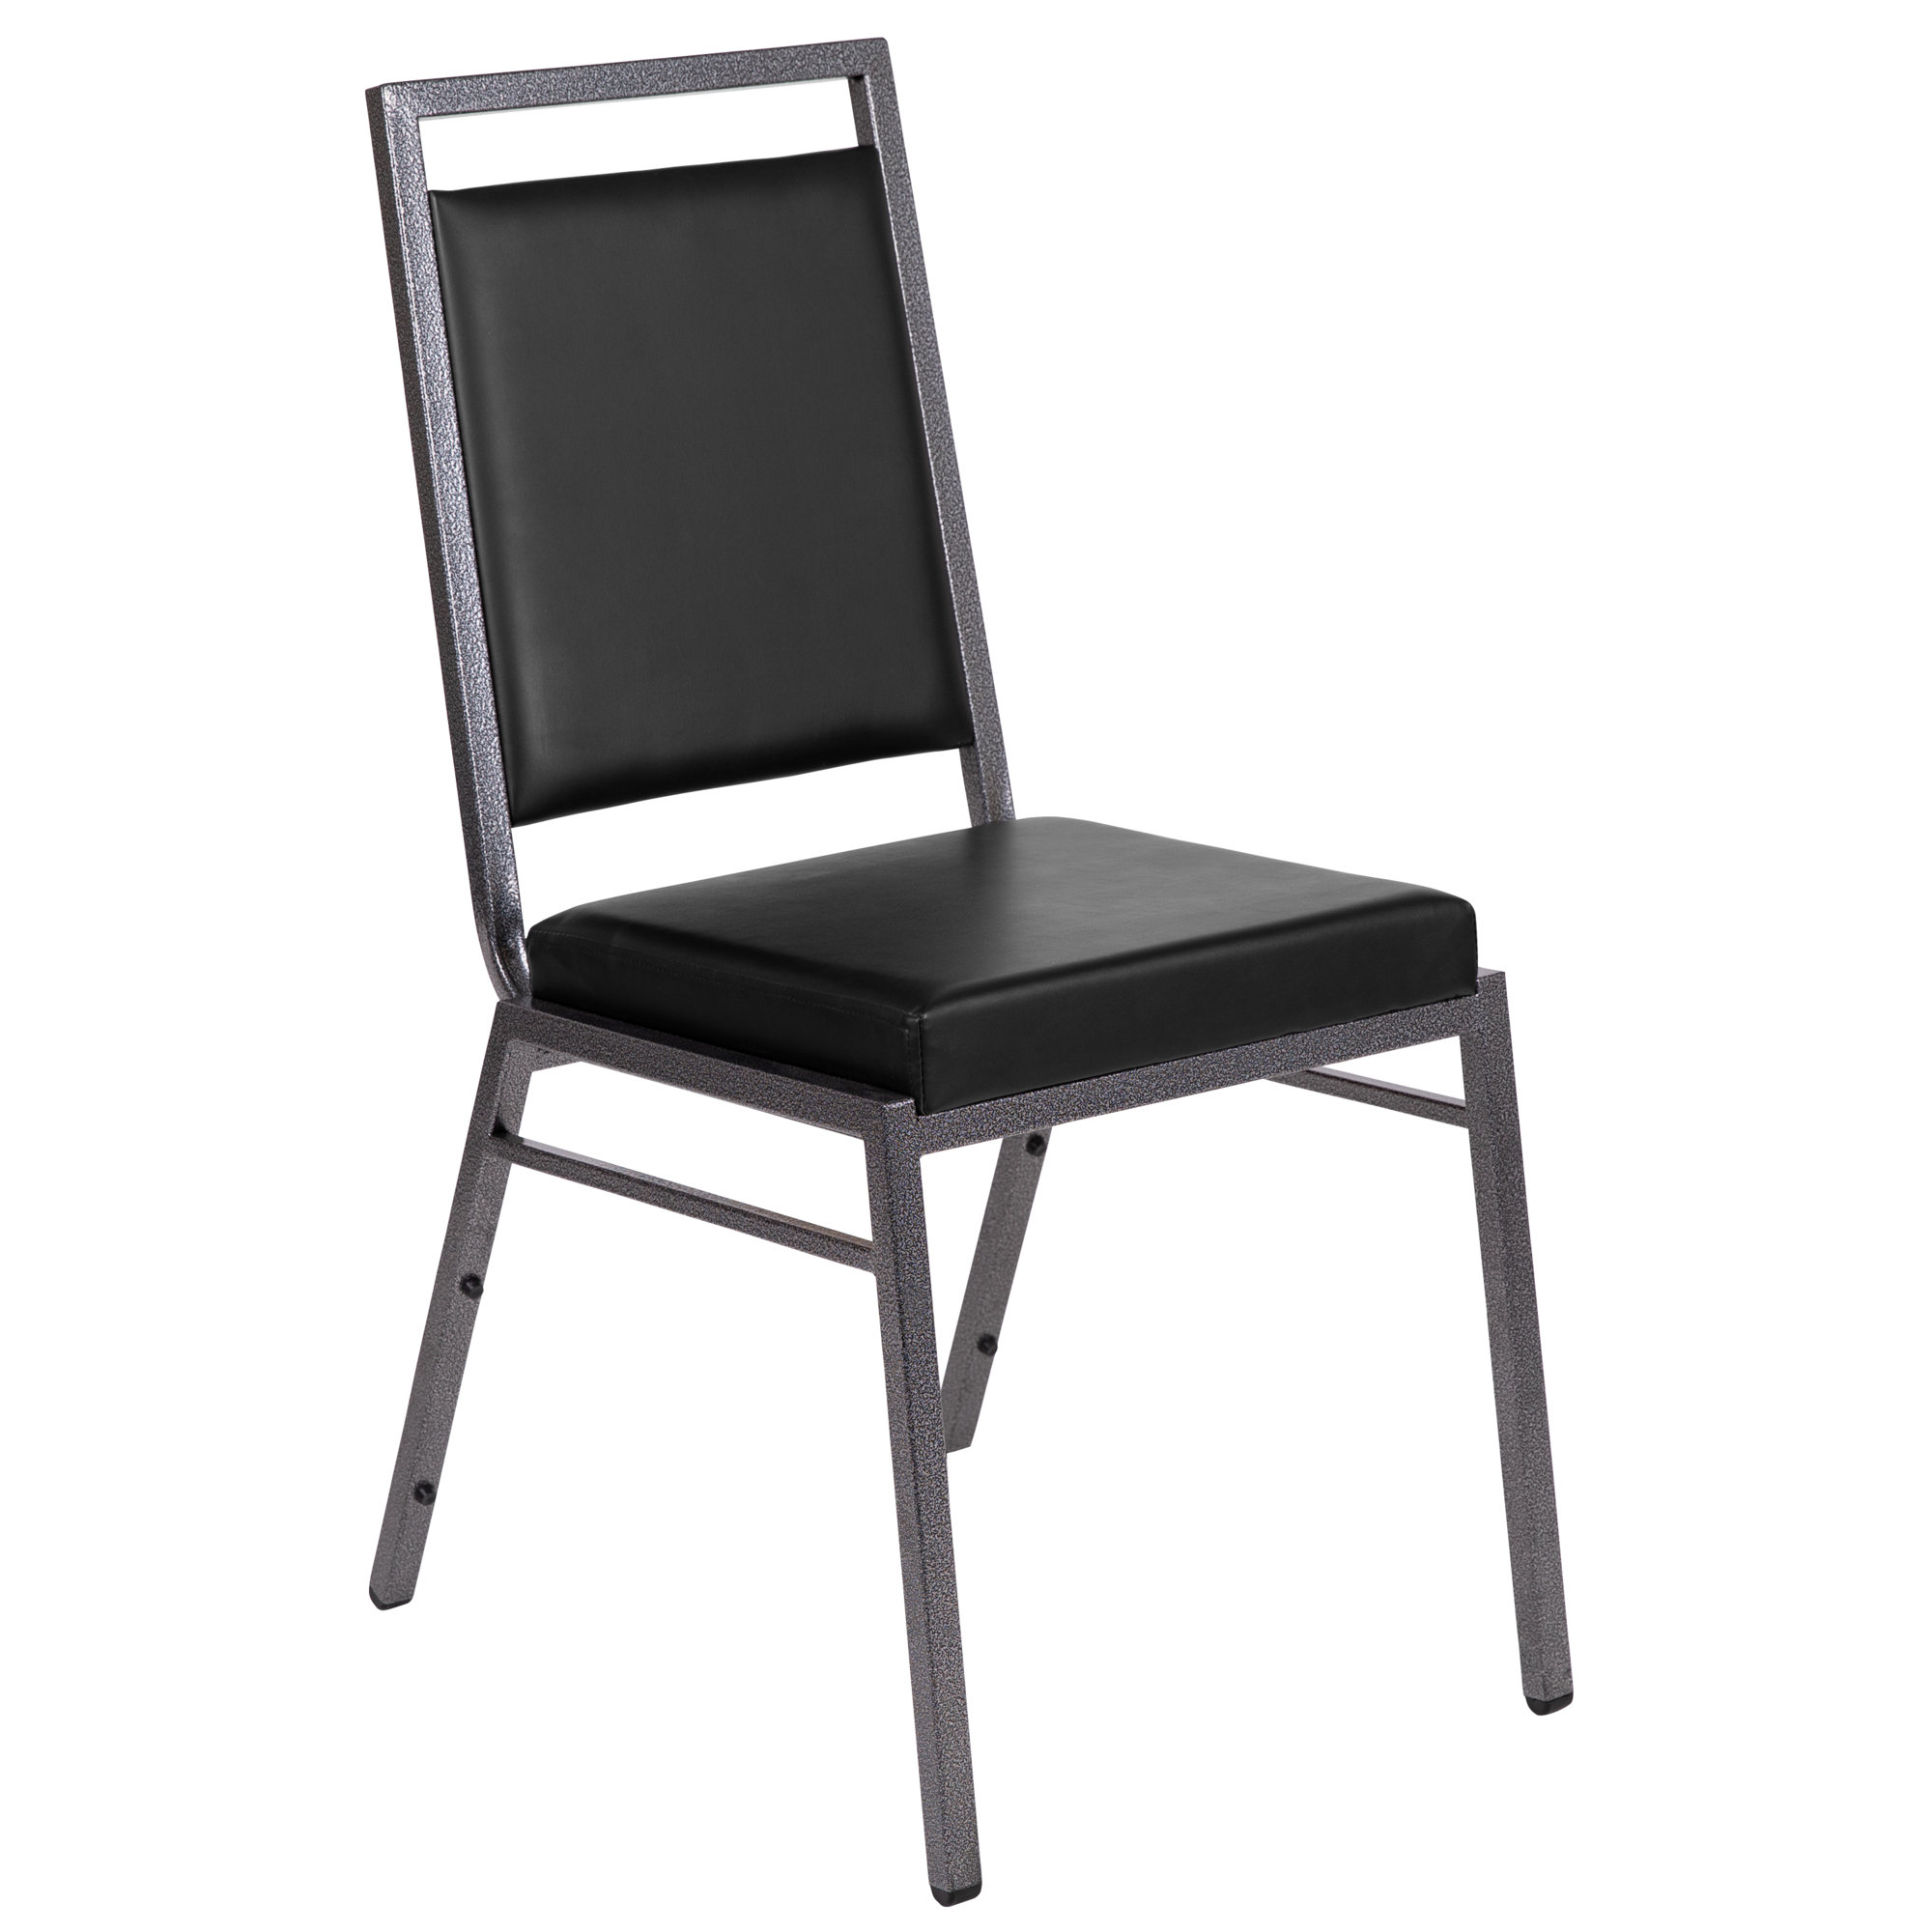 Flash Furniture, Square Back Event Banquet Stack Chair, Black Vinyl, Primary Color Black, Included (qty.) 1, Model FDLUXSILBKV